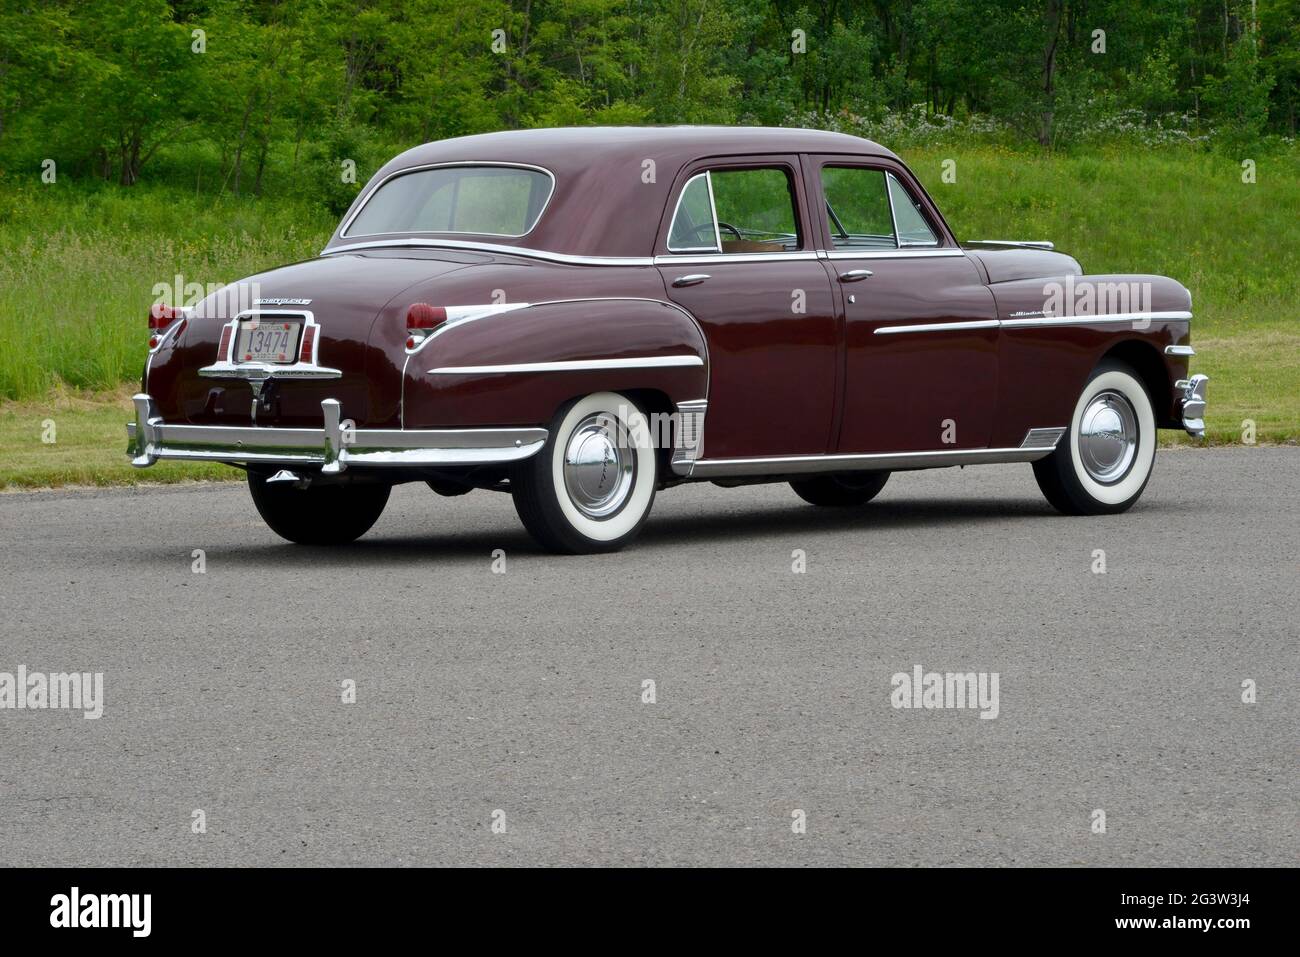 A three-quarter-rear view of a 1949 Chrysler Windsor four-door sedan before a wooded background in soft light. Stock Photo